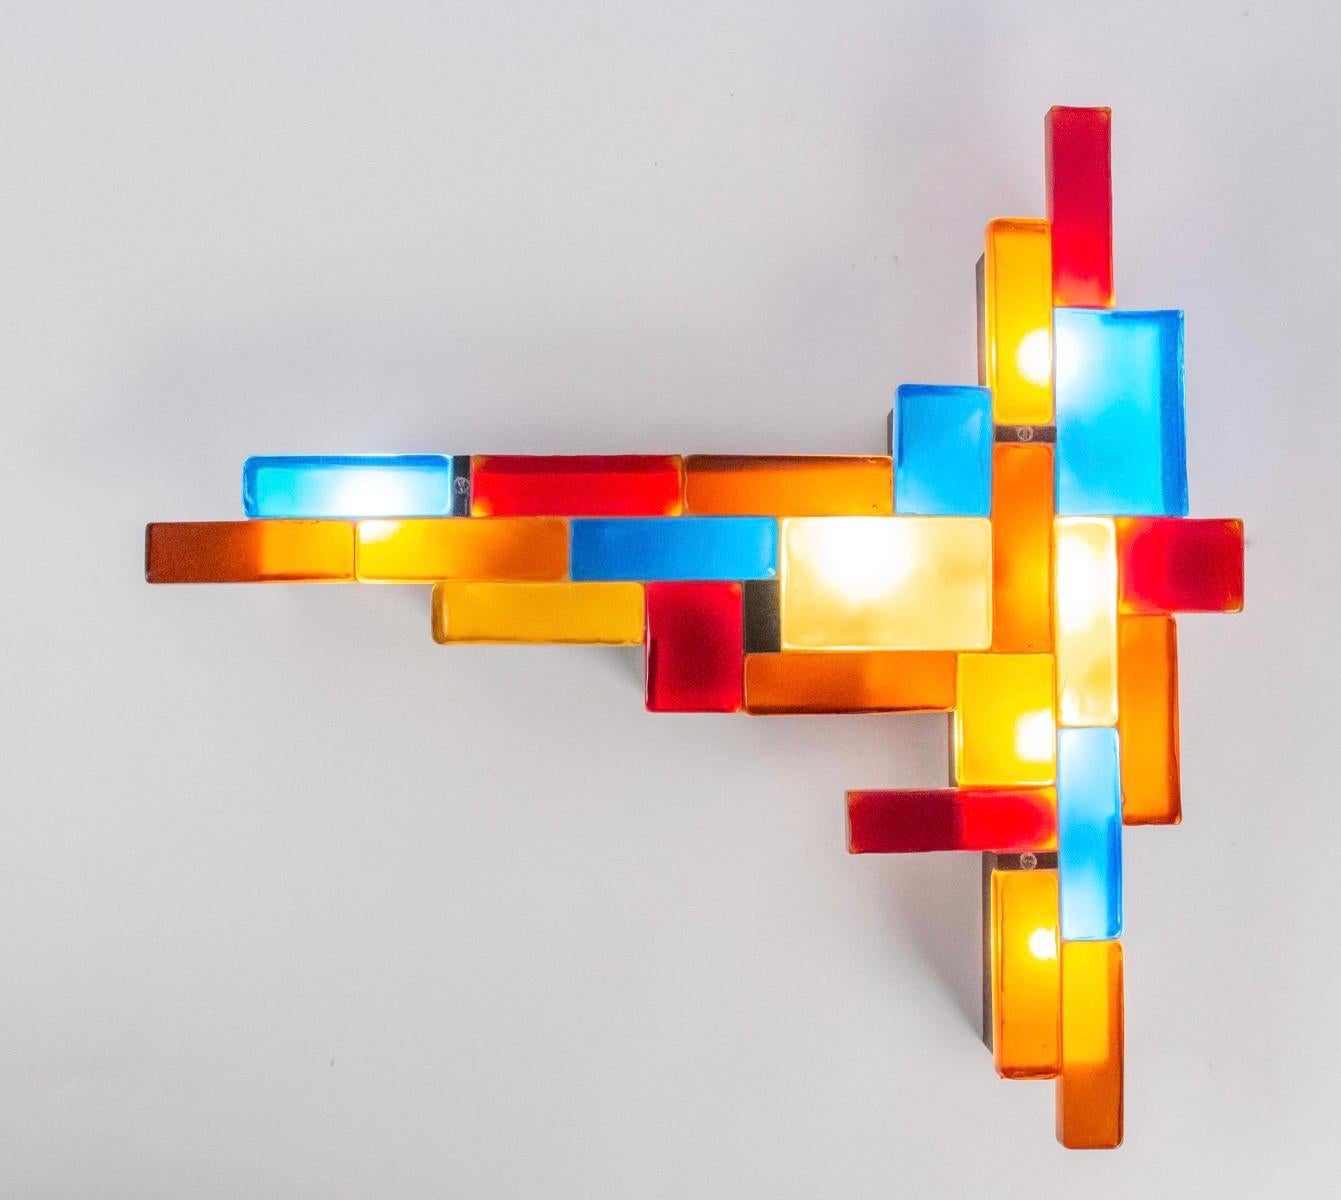 This rare and large sconce is composed of different pieces of tinted glass slabs. The colors range from blue, yellow, orange and red. All the stained glass pieces are mounted on a blackened wrought iron frame. 
The 7 bulbs provide a soft and